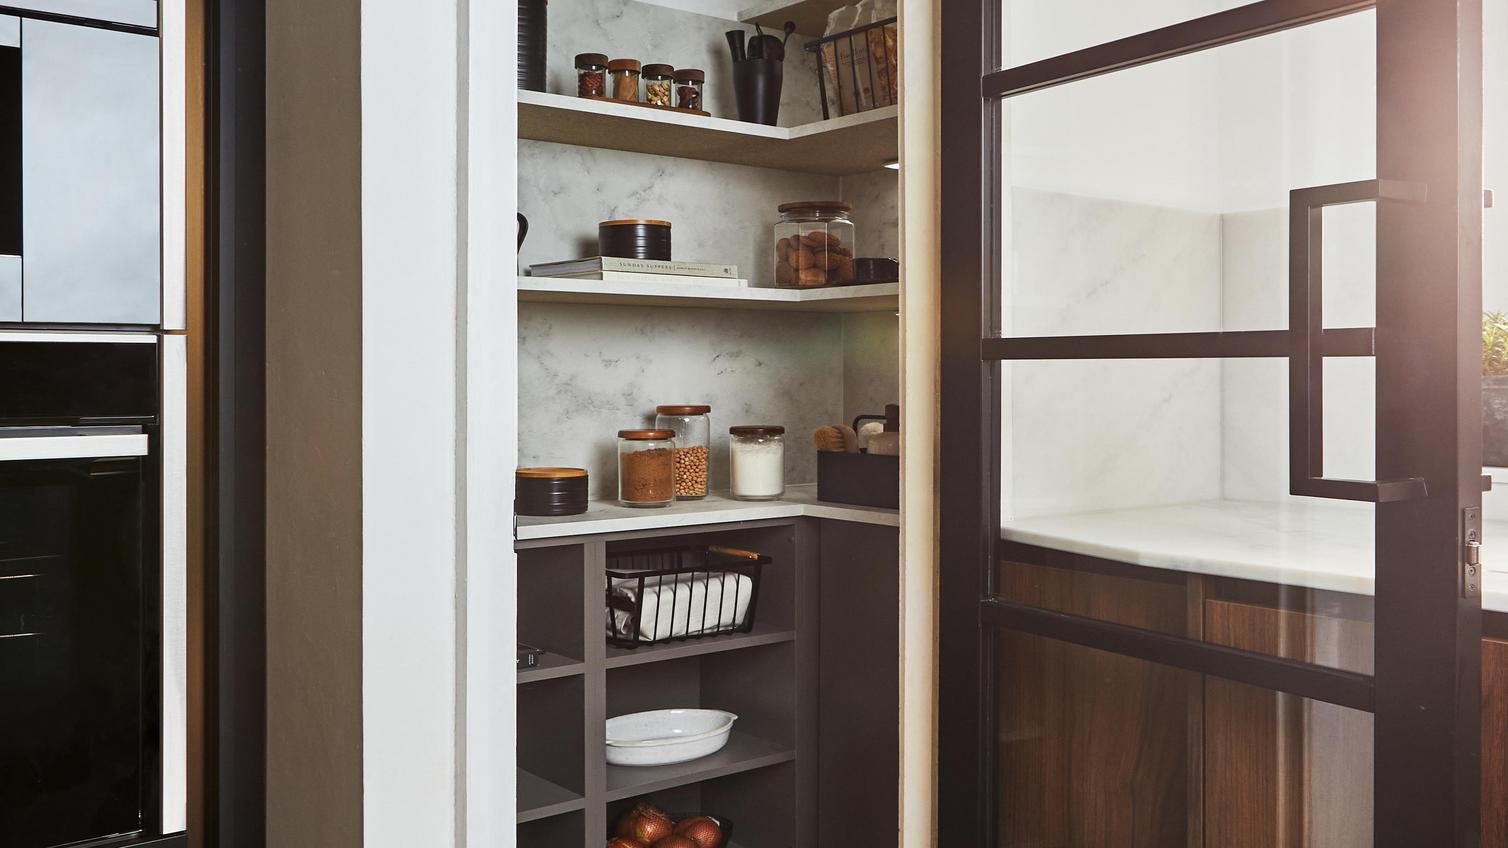 A compact pantry featuring built-in and open shelving shelving. Includes a glazed door with a black frame for a modern look.